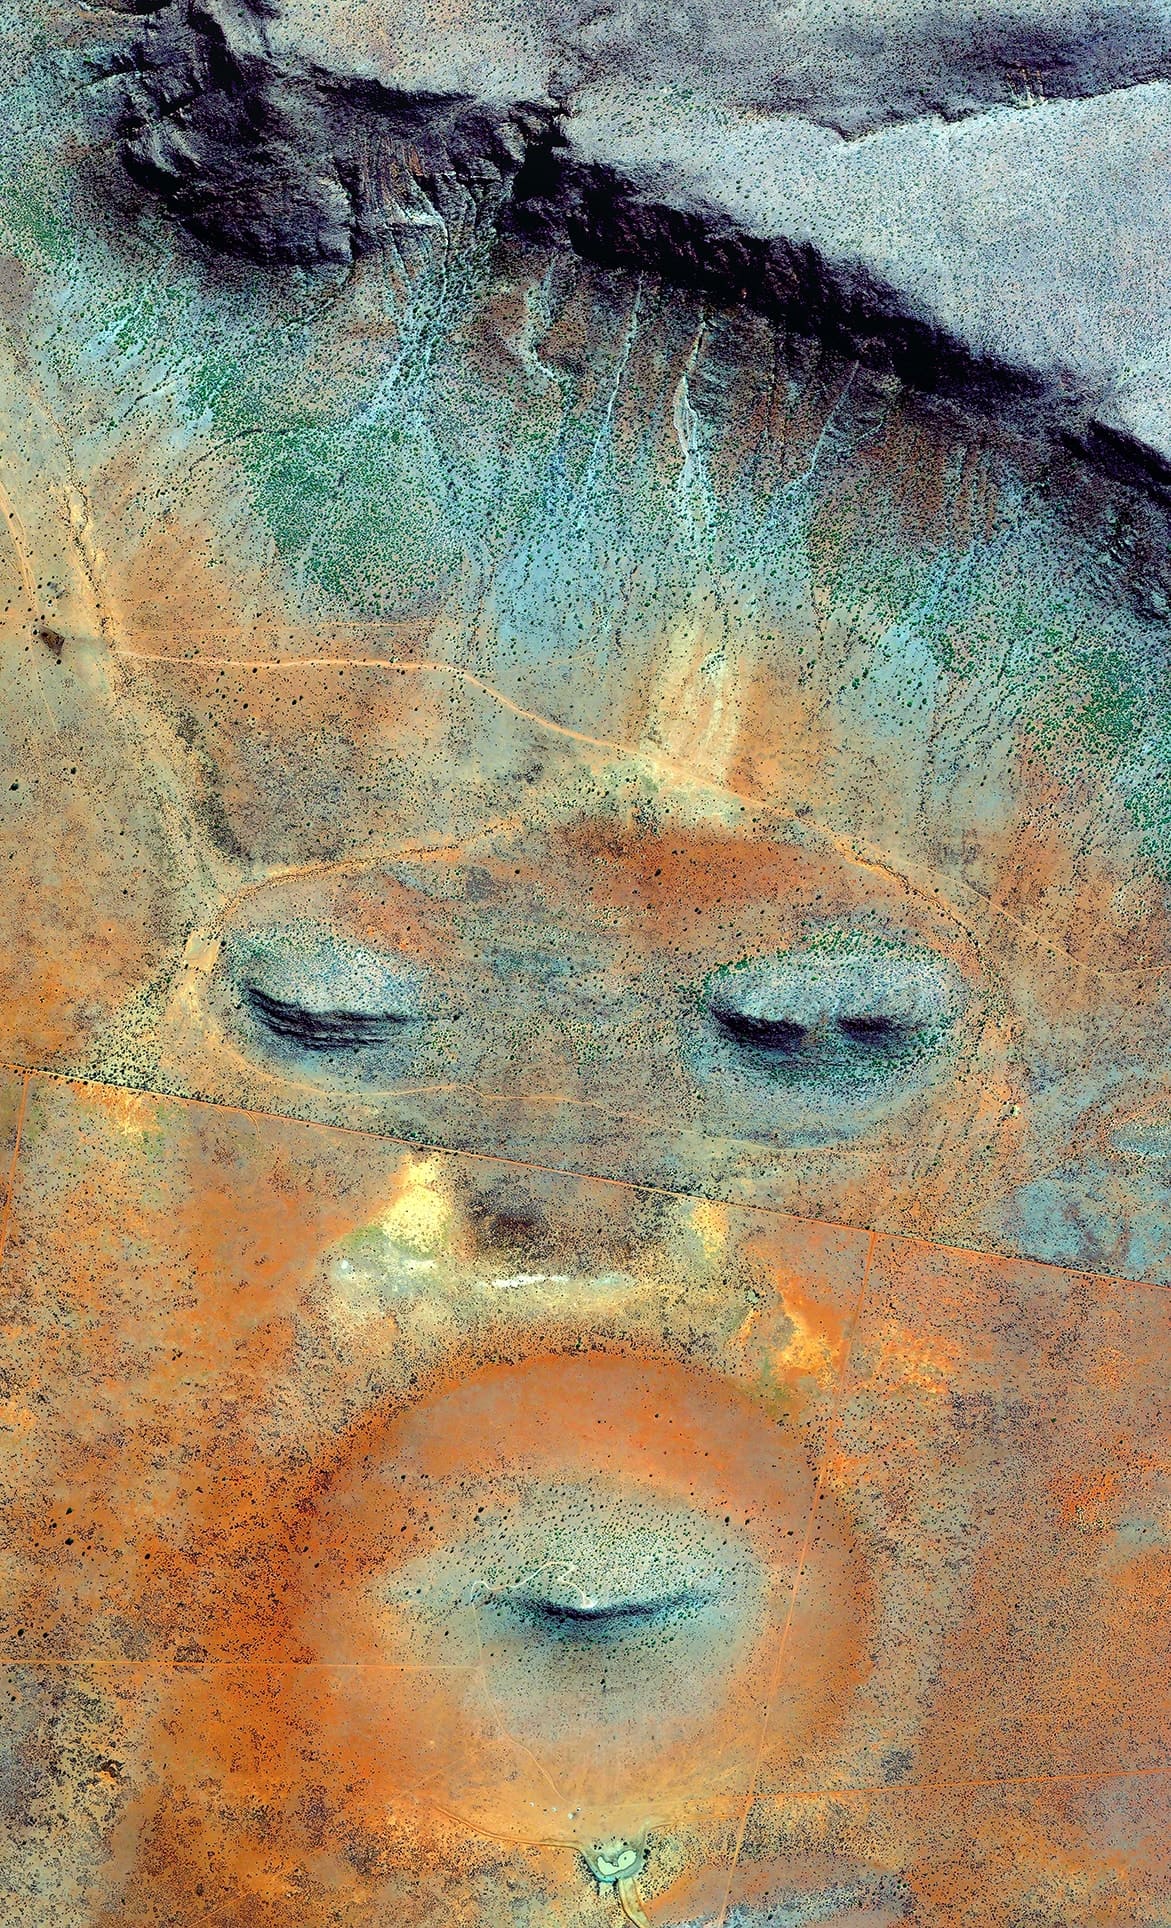 EARTH PORTRAIT 23 NAMIBIA, 2016, CM 130×80, edition of 9